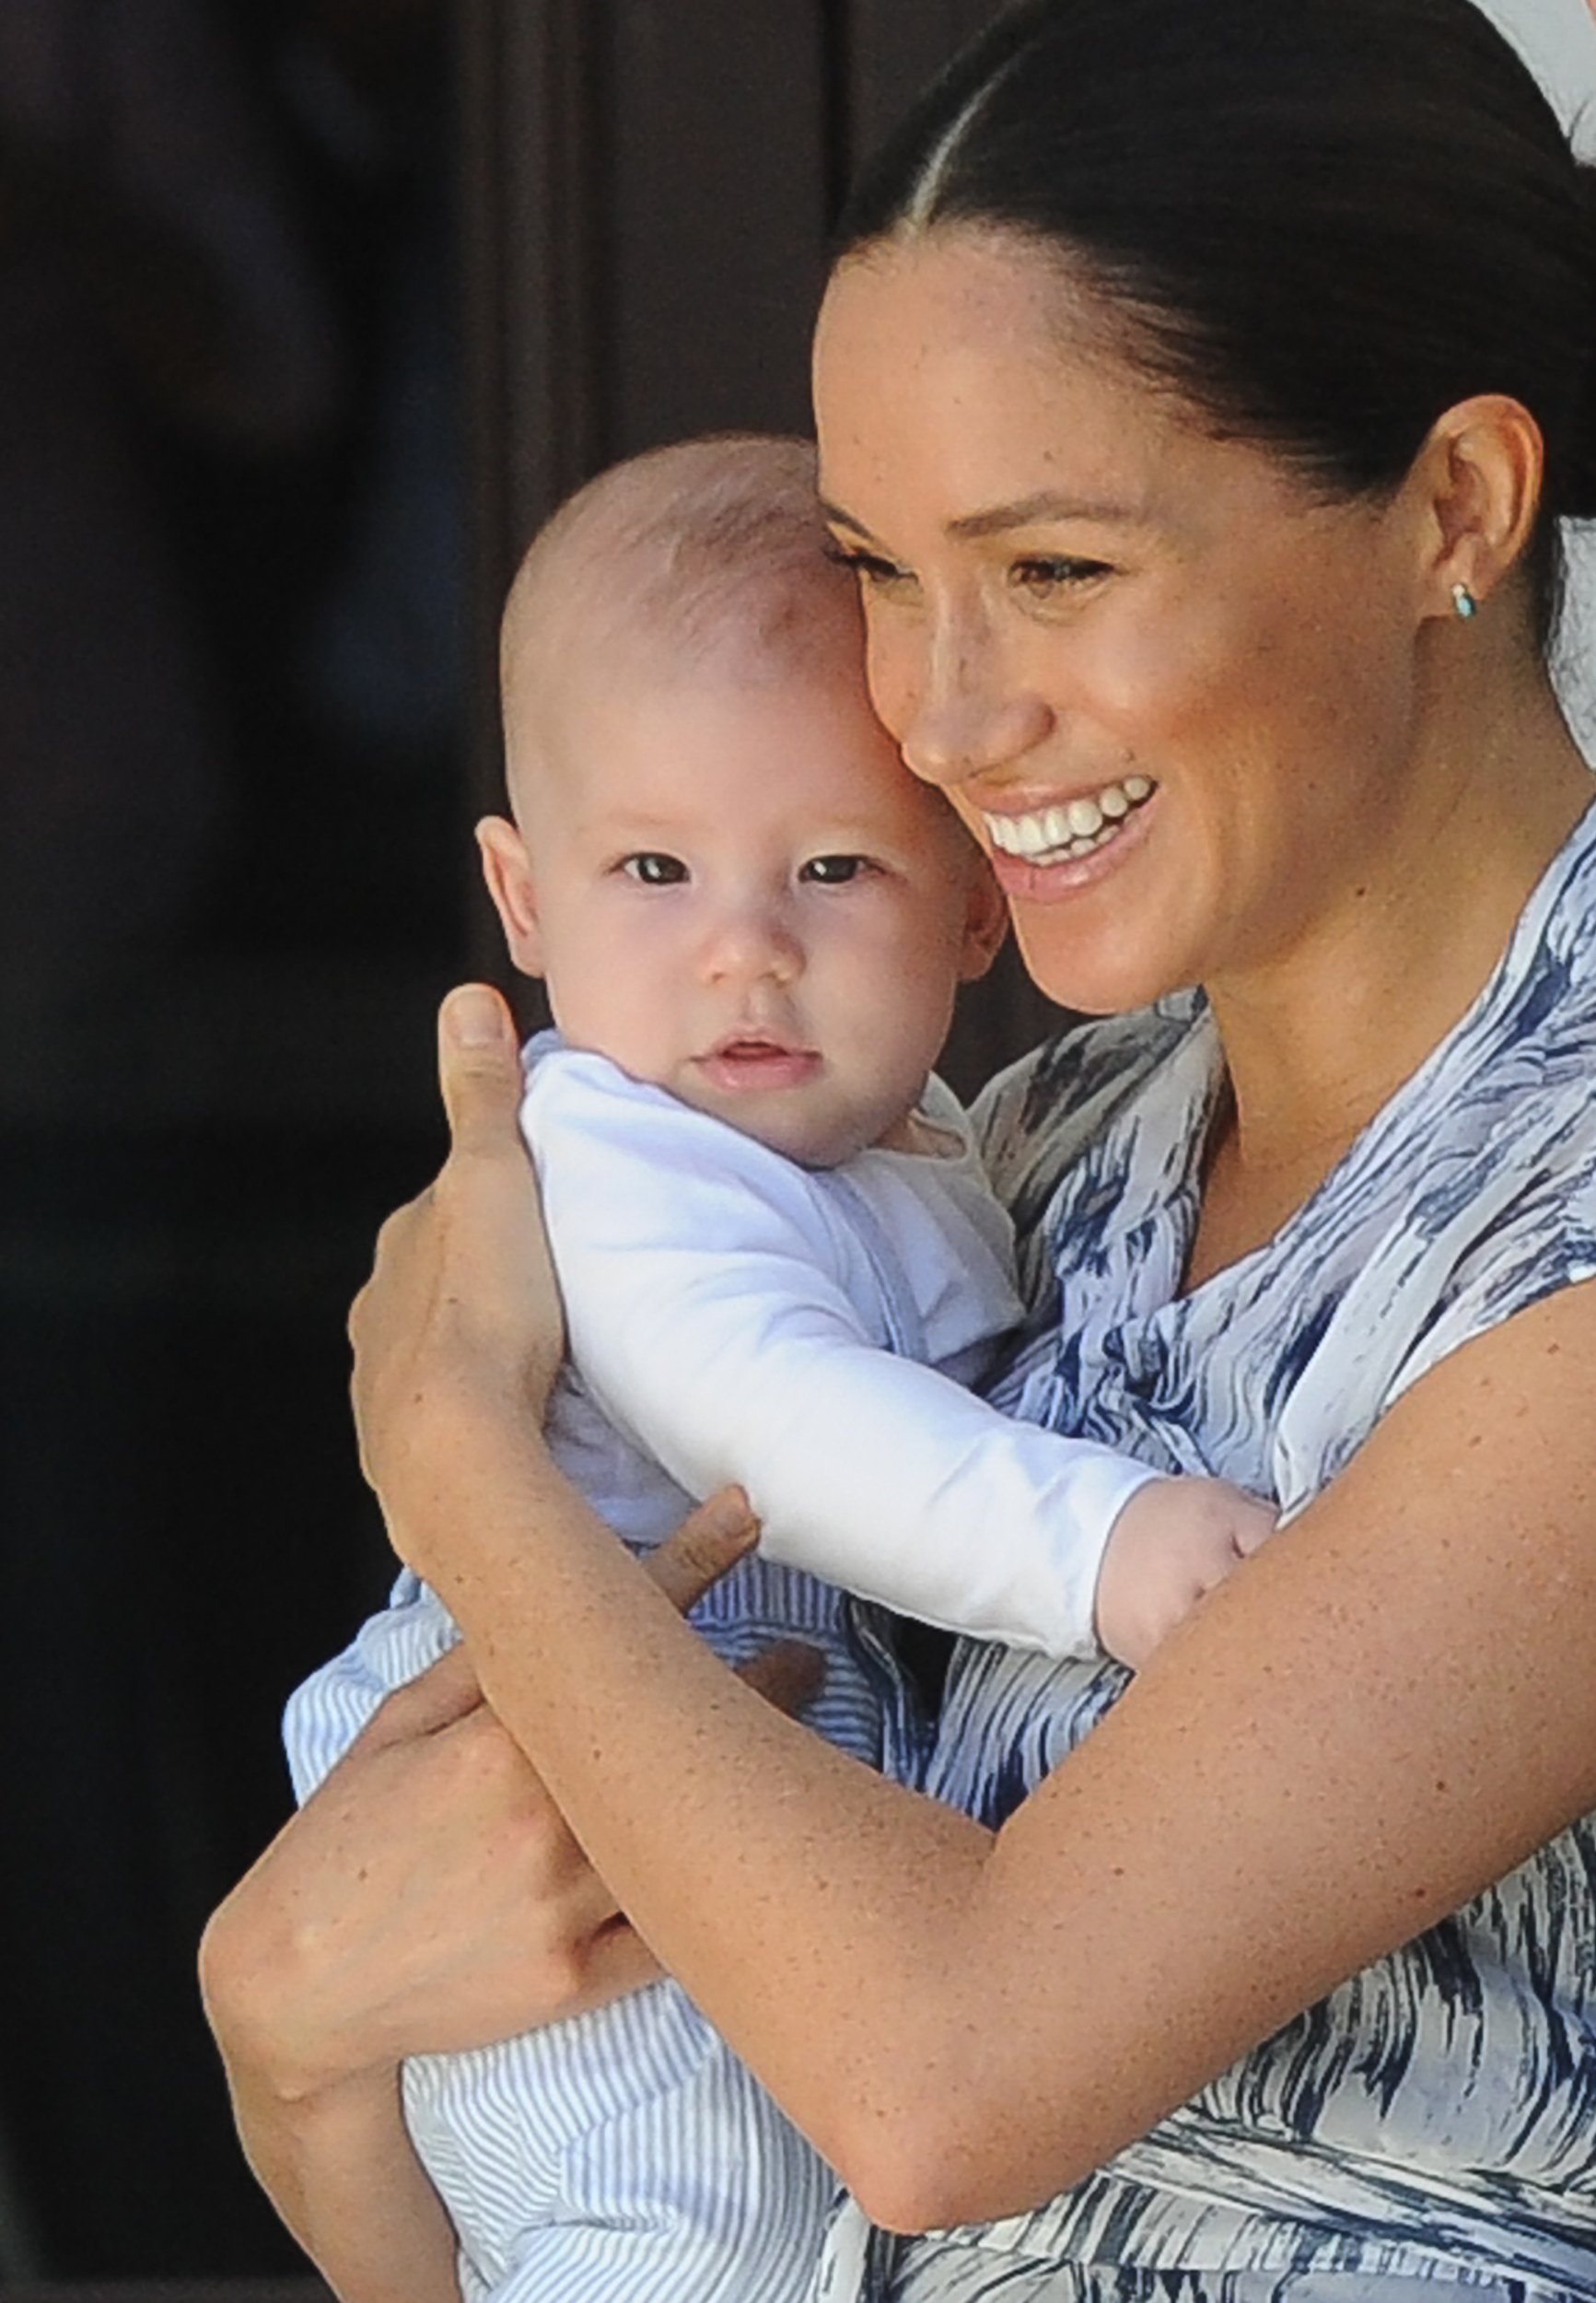 Royal Baby Archie Makes Debut During South Africa Tour | The Daily Caller